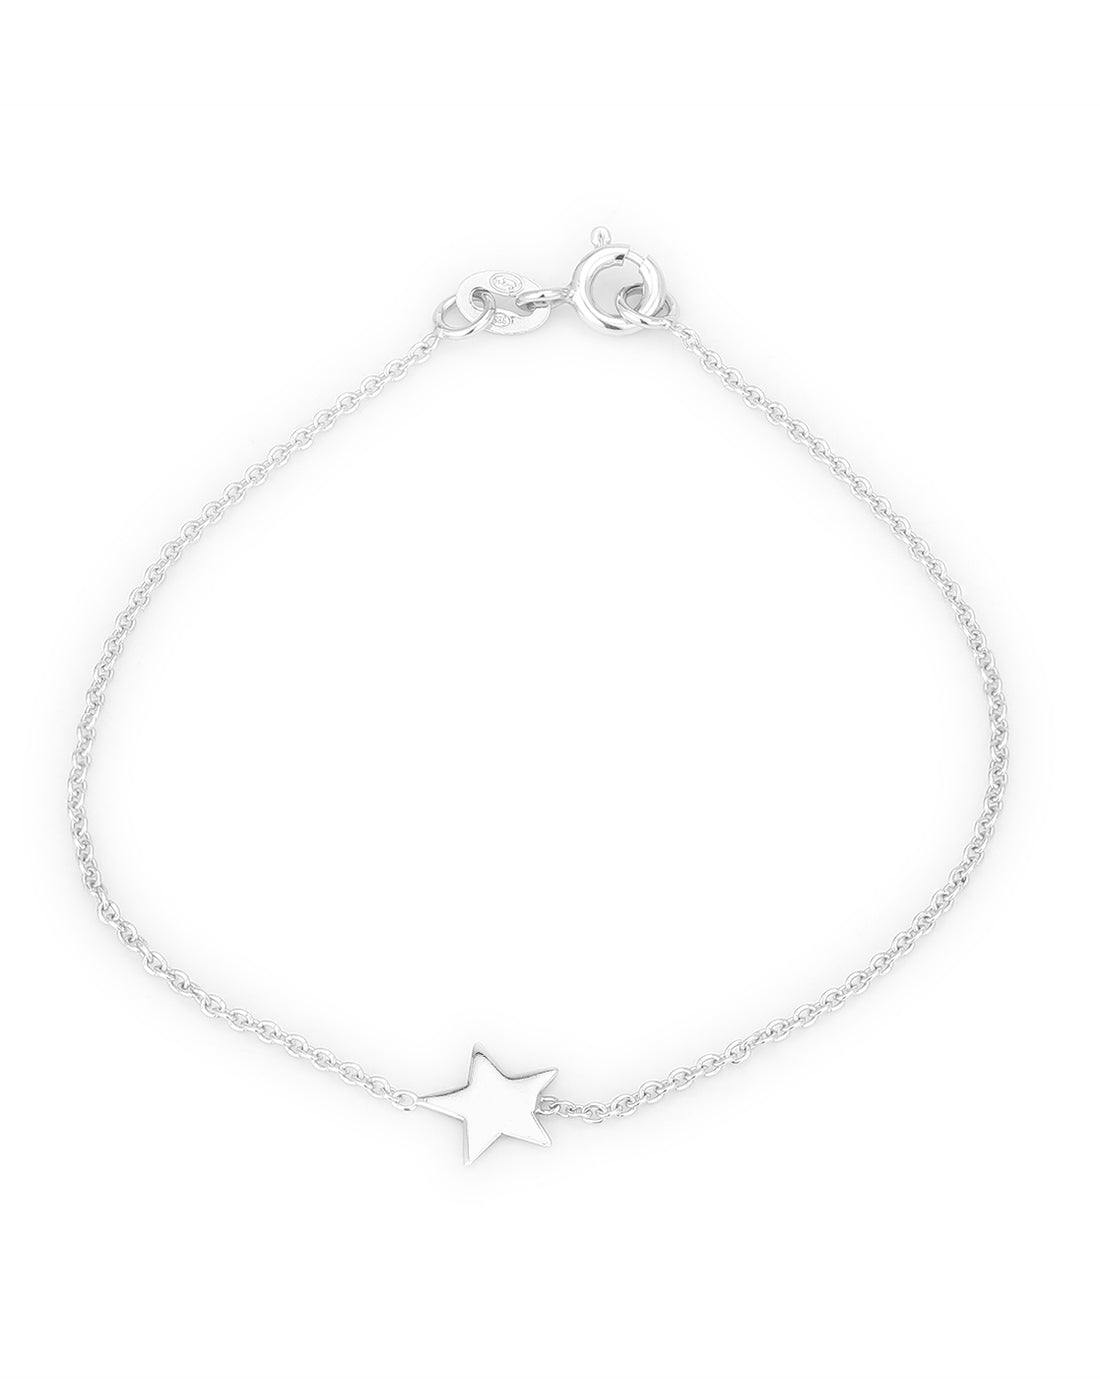 Carlton London 925 Sterling Silver Rhodium Plated with  Star Charm Bracelet